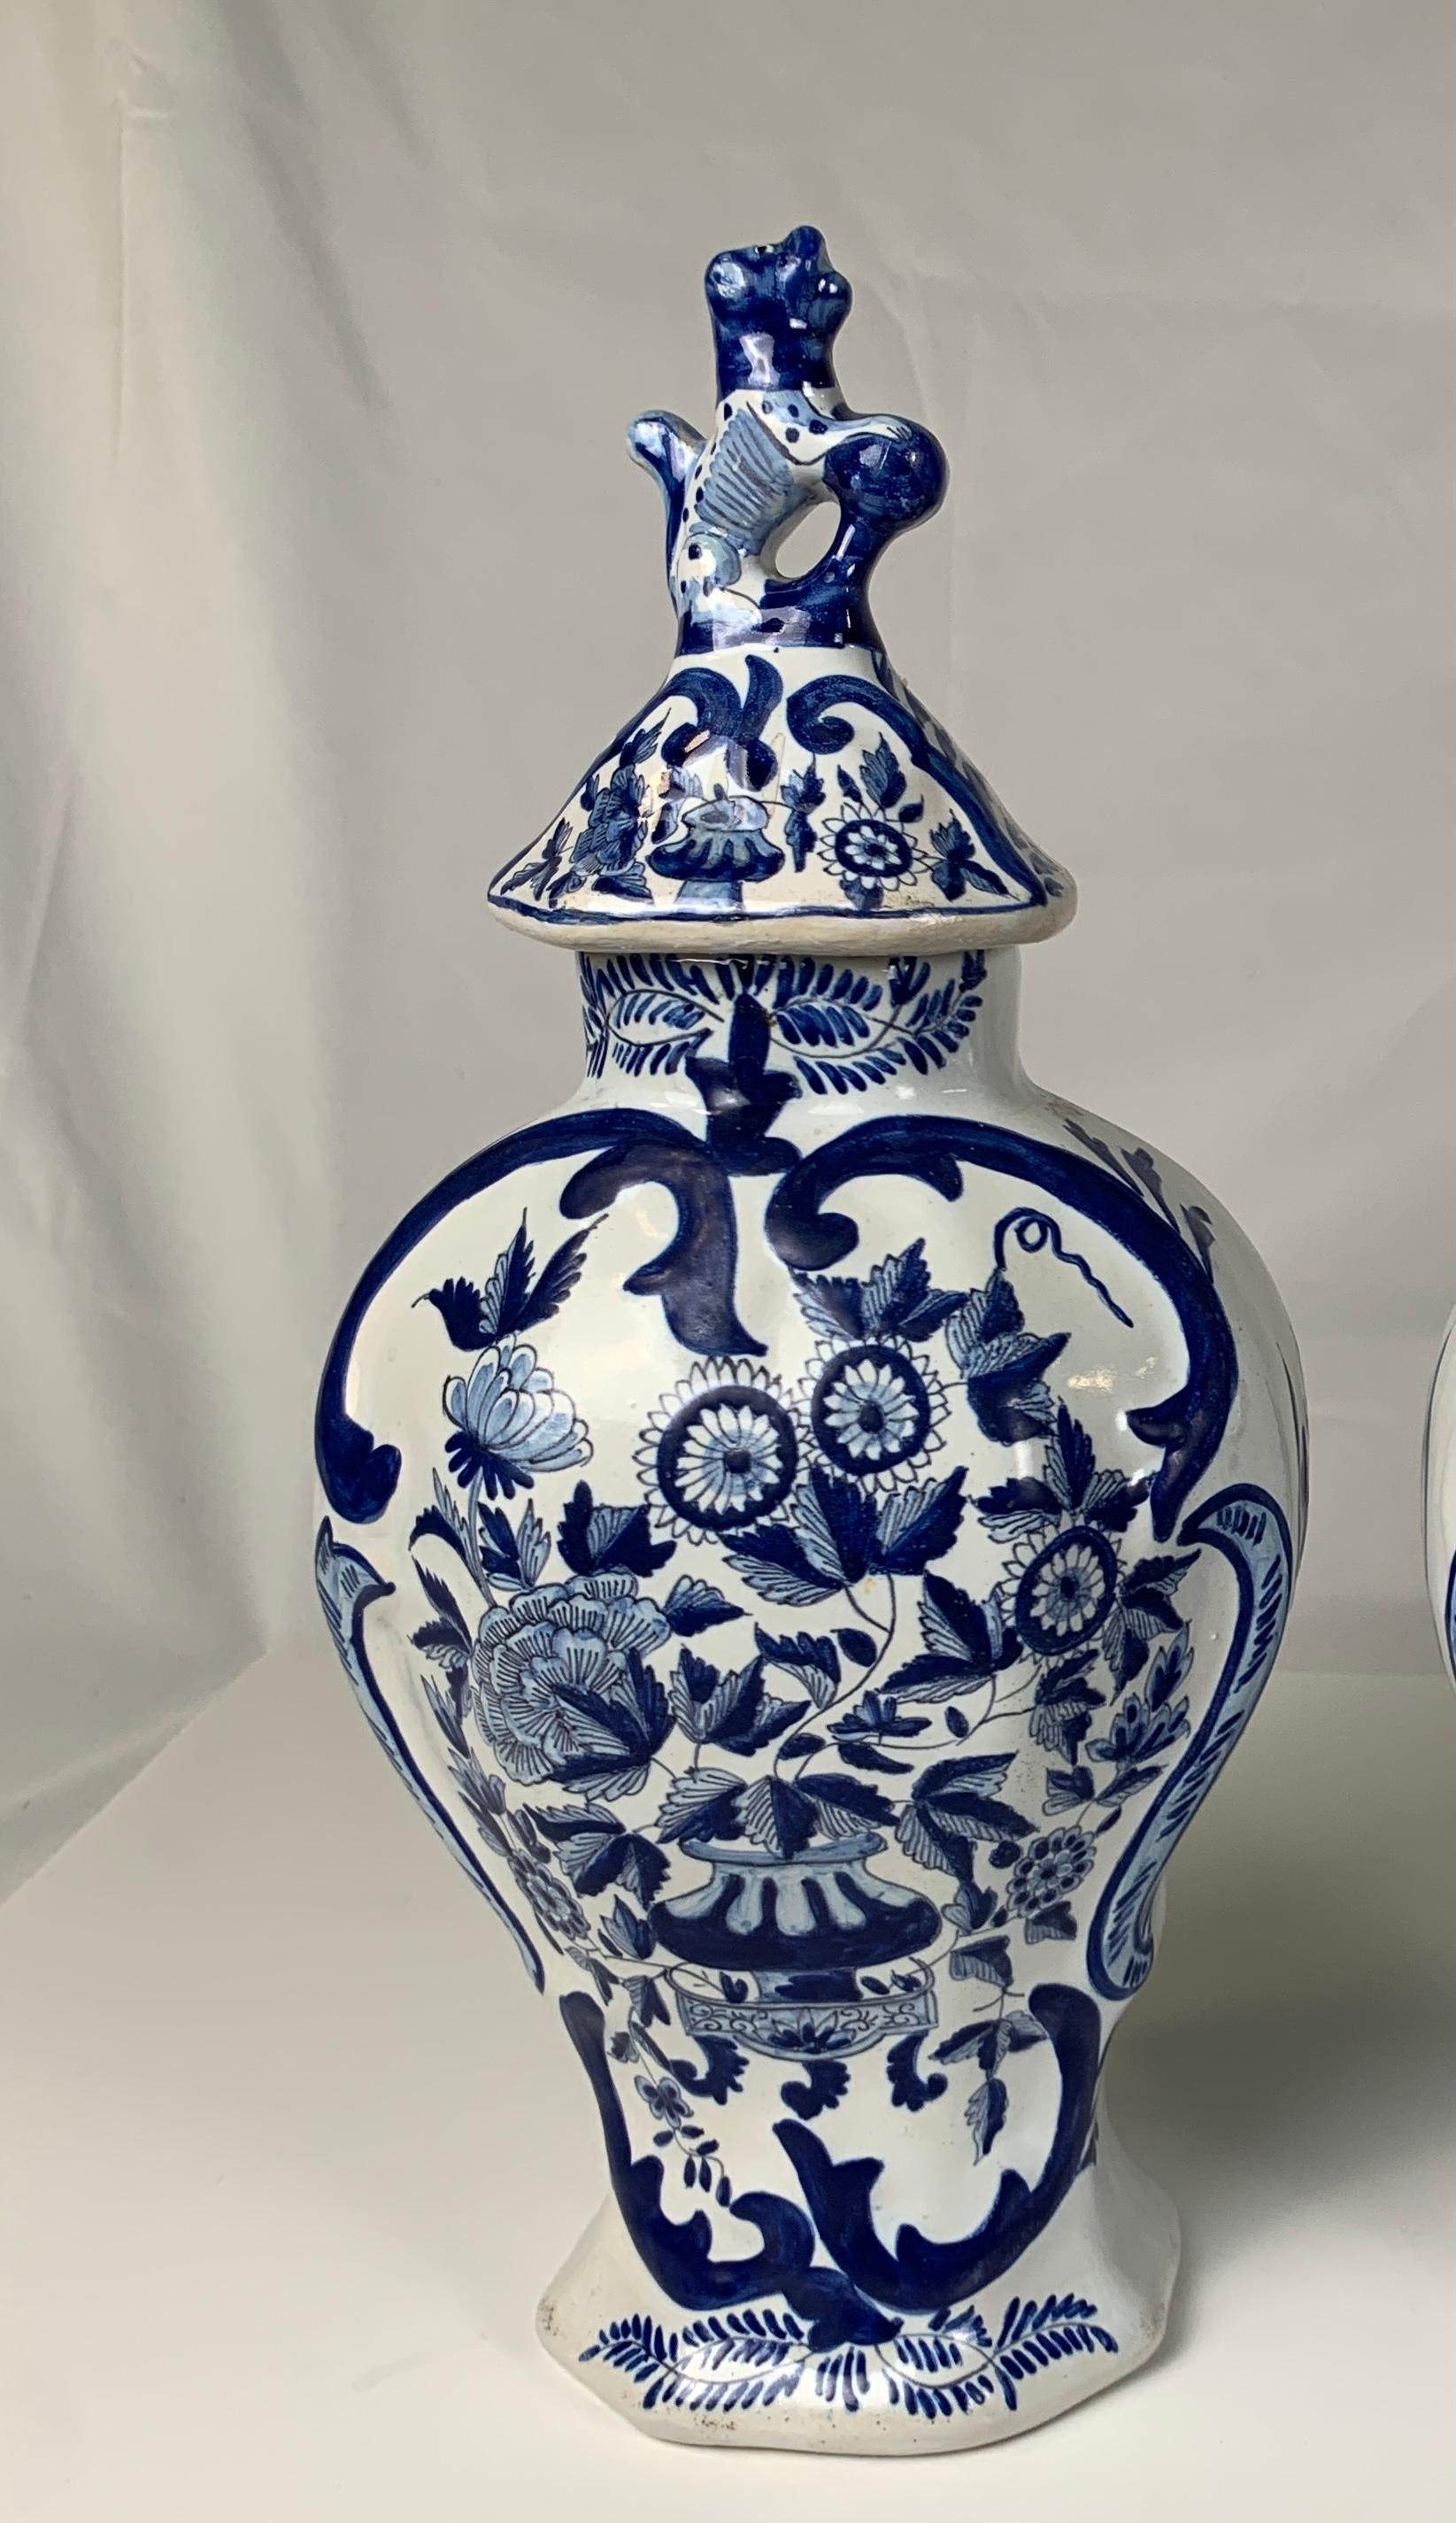 Group of Large Dutch Delft Jars and Vases 18th-19th and 20th Centuries 1